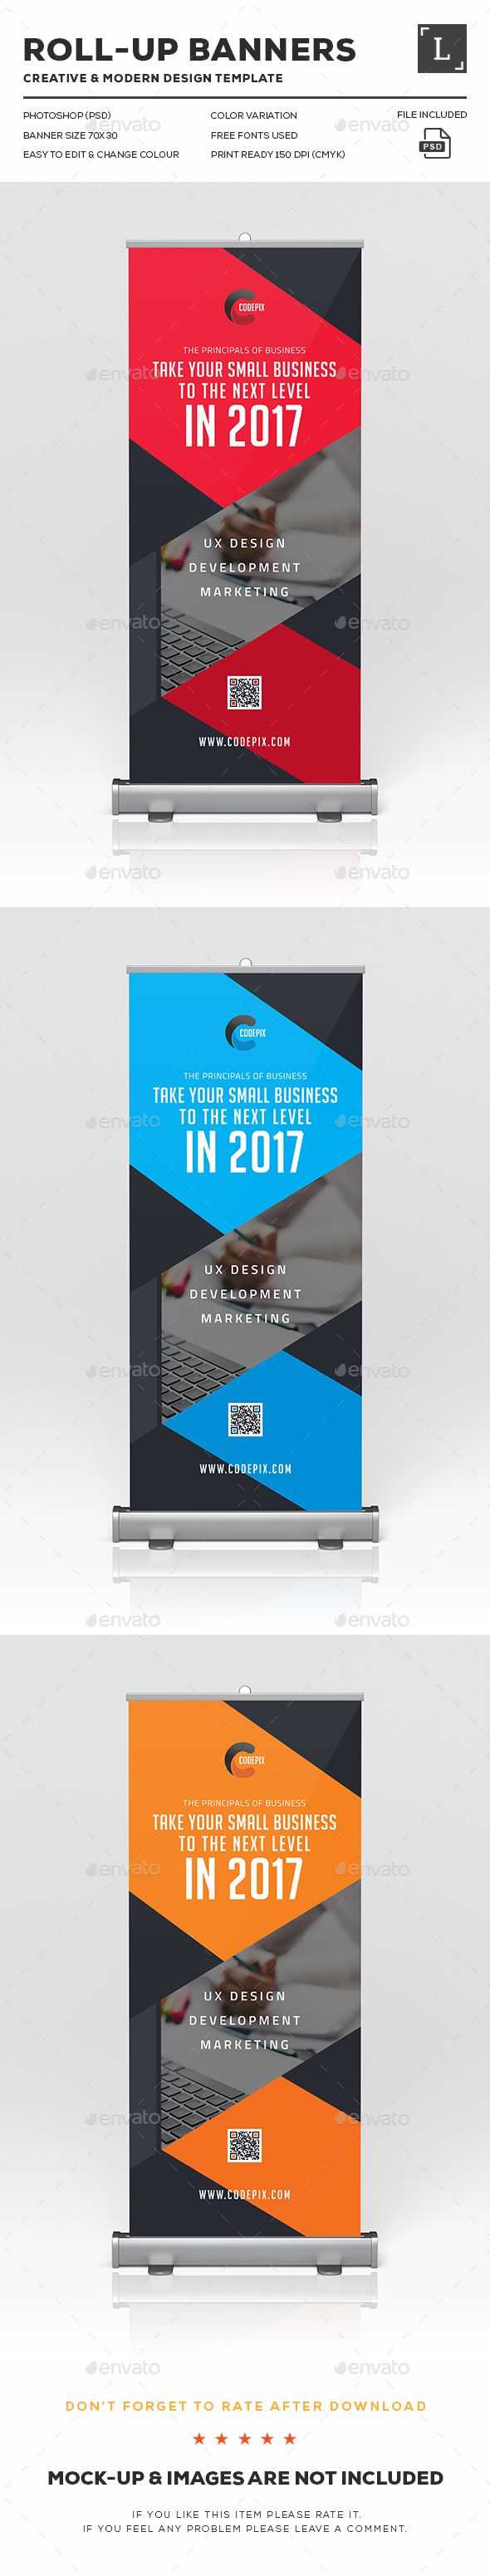 Corporate Roll Up Banner Design Template – Signage Print With Outdoor Banner Design Templates